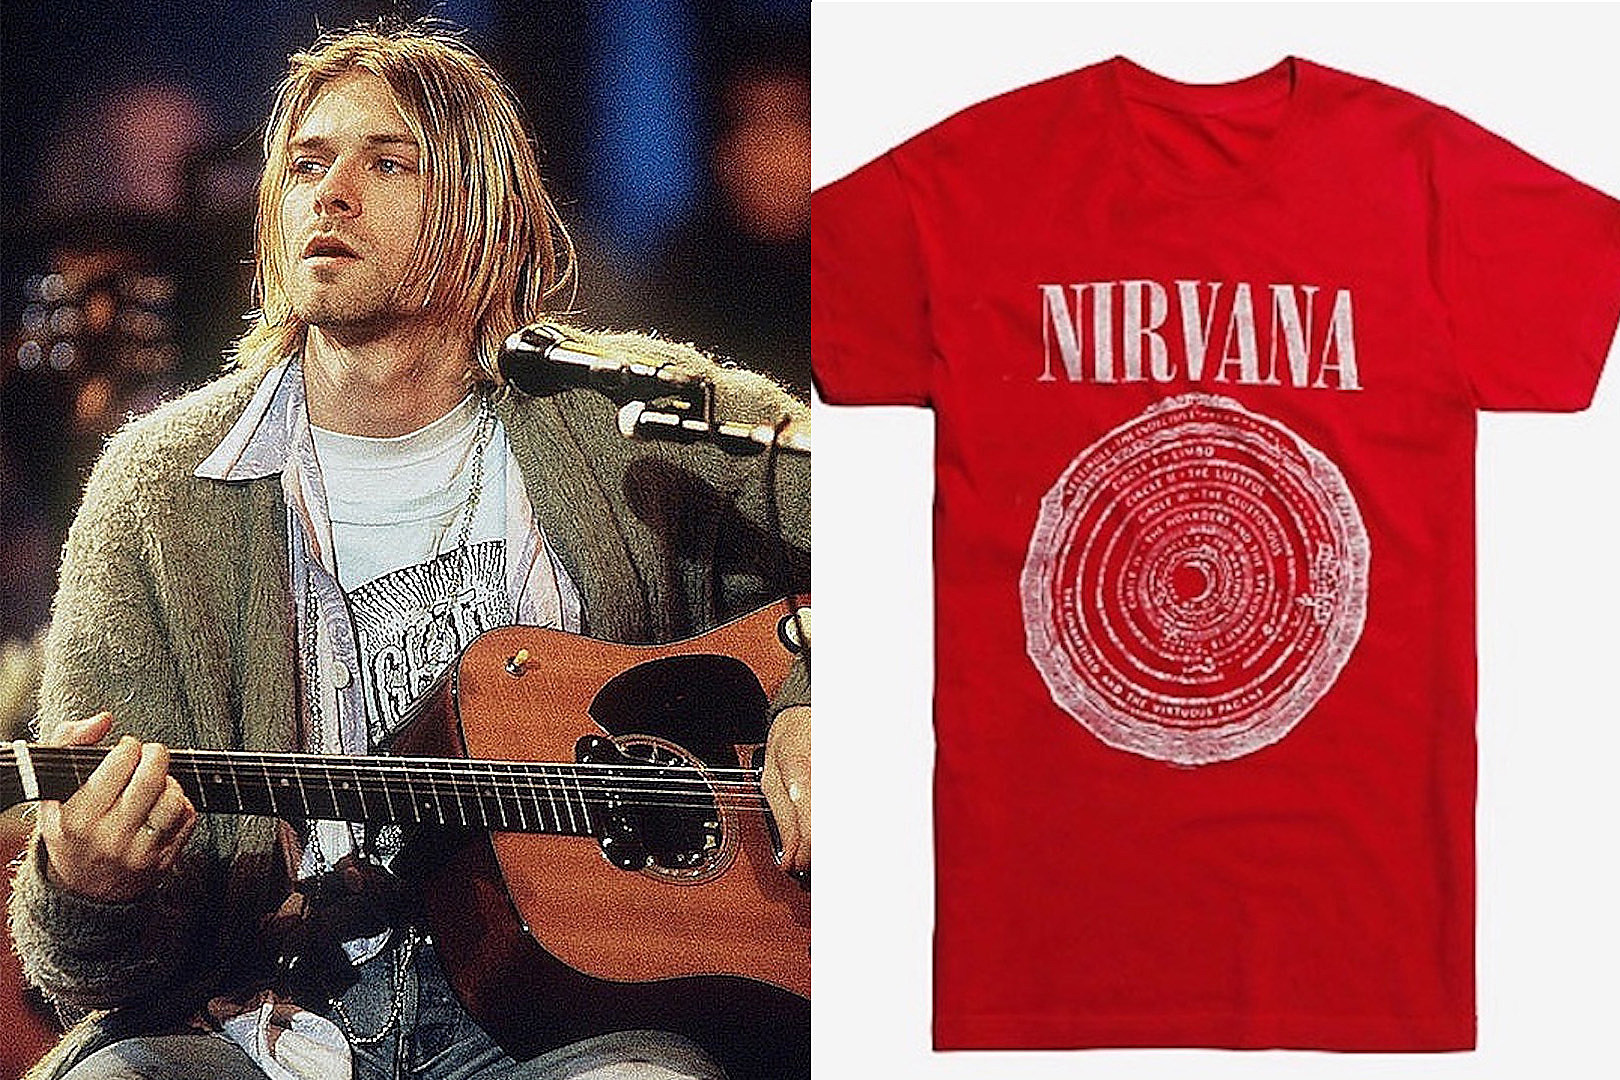 Nirvana Sued Over Merch Design Inspired By Dante's 'Inferno'